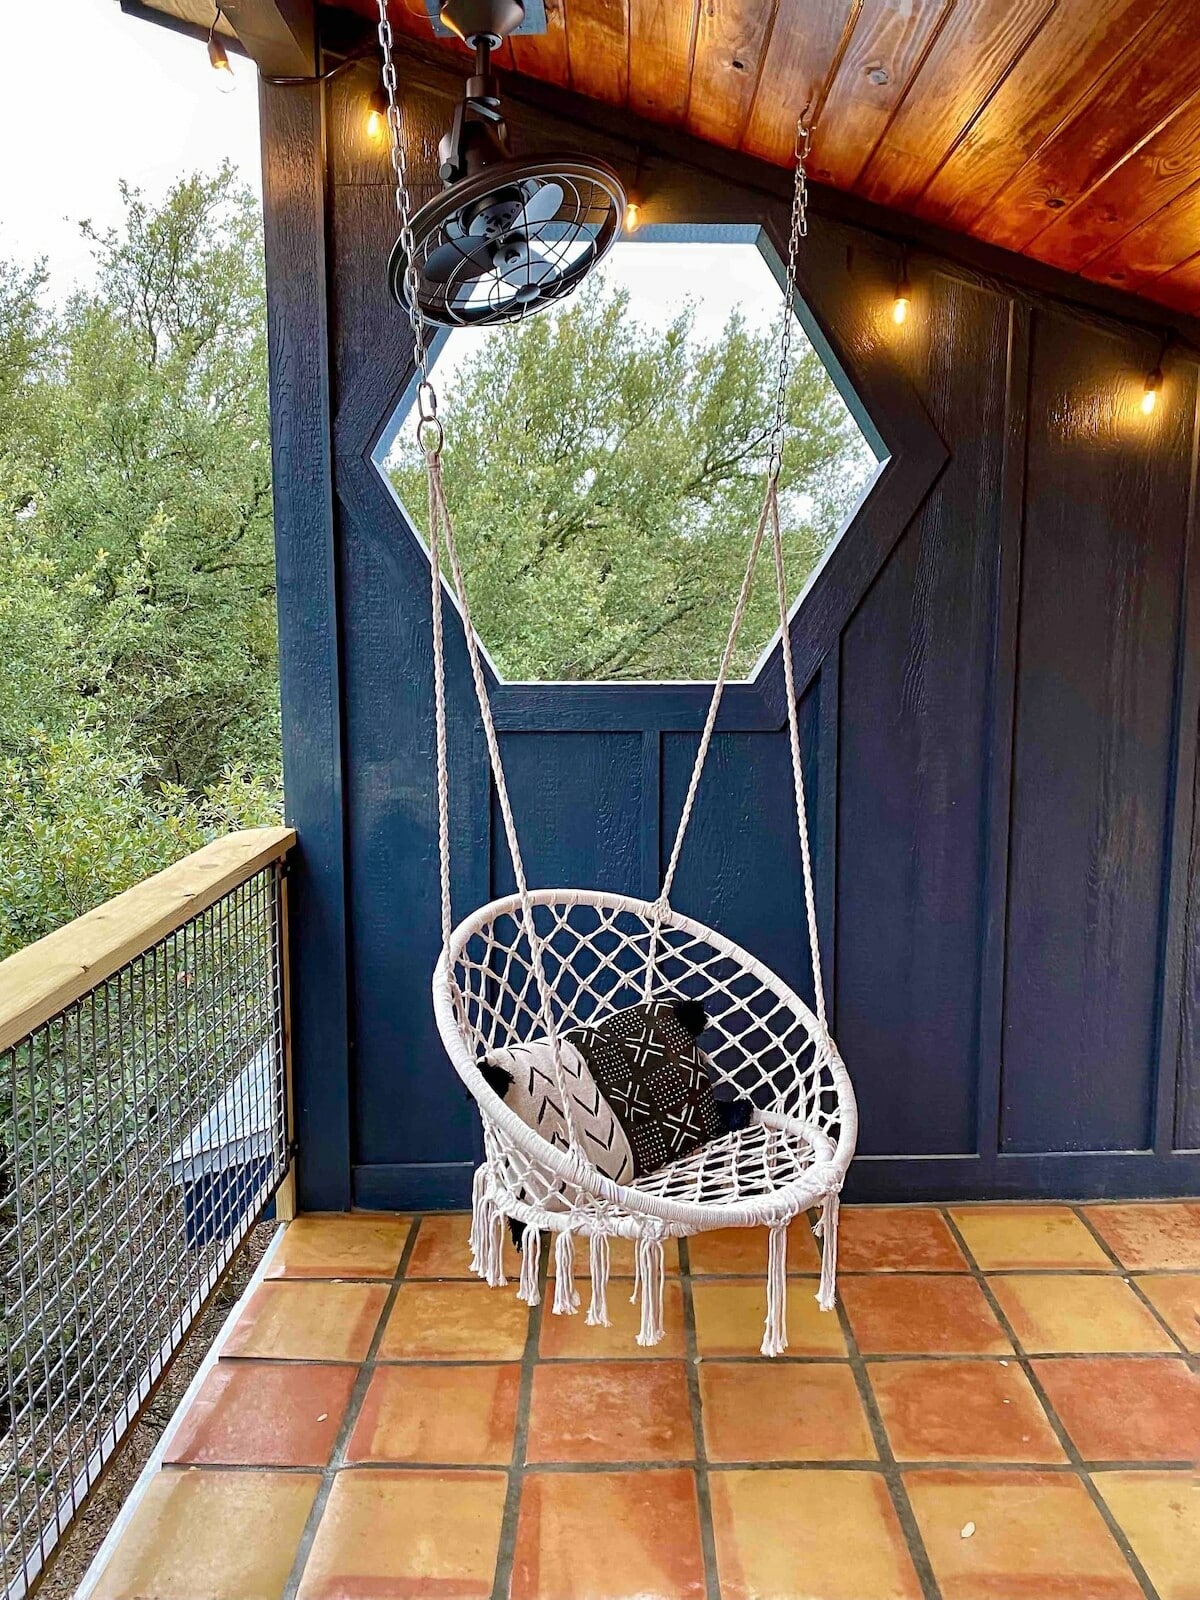 A top covered sleeping porch balcony balcony-side with a hanging round macrame seat, a large circulatory fan mounted on steeply pitched ceilin